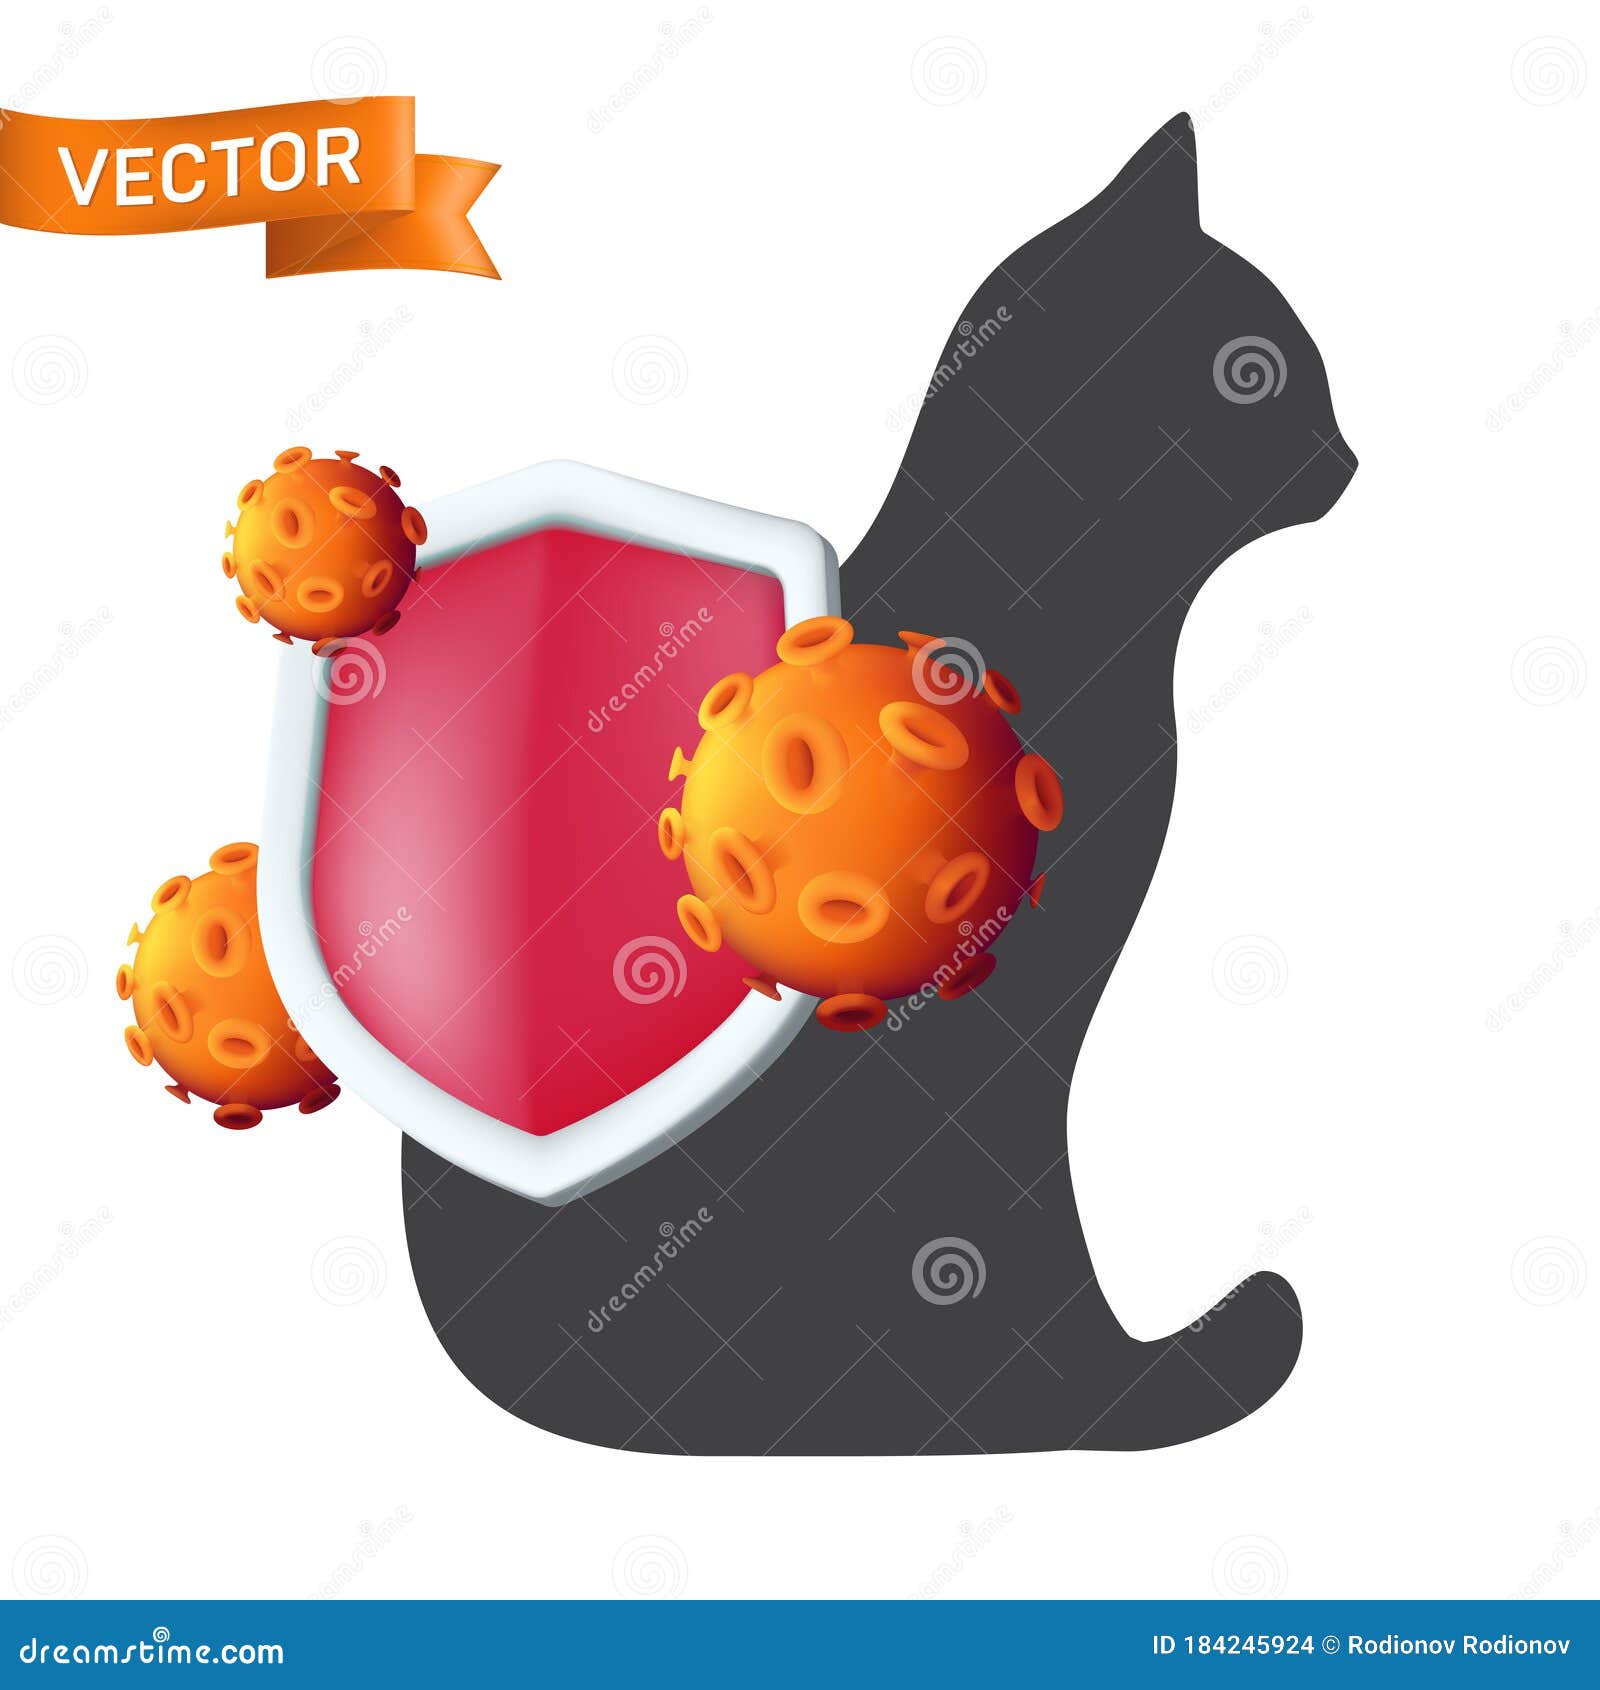 The Red Antibacterial Shield Protects Against Germs or Virus Cells on the  Cat Animal Silhouette. Protective Bacterial and Virus Stock Vector -  Illustration of resistance, illness: 184245924